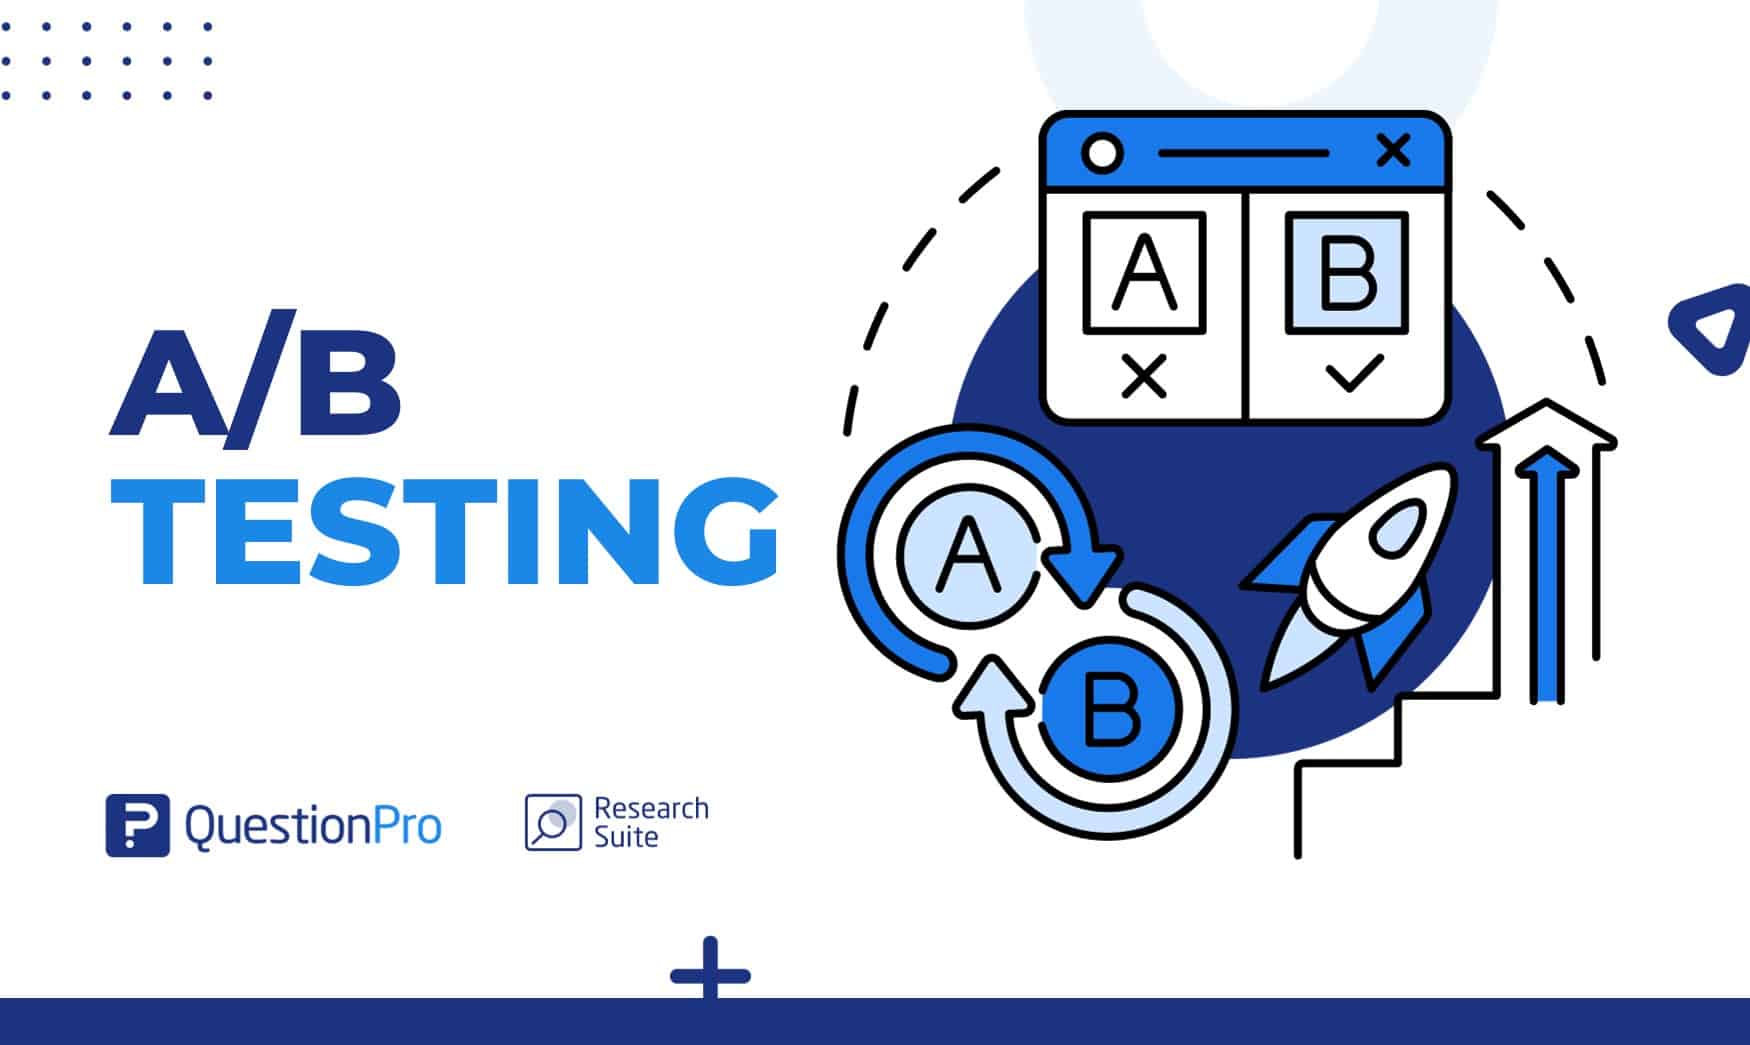 A/B Testing: What is it, Benefits + How to do it?